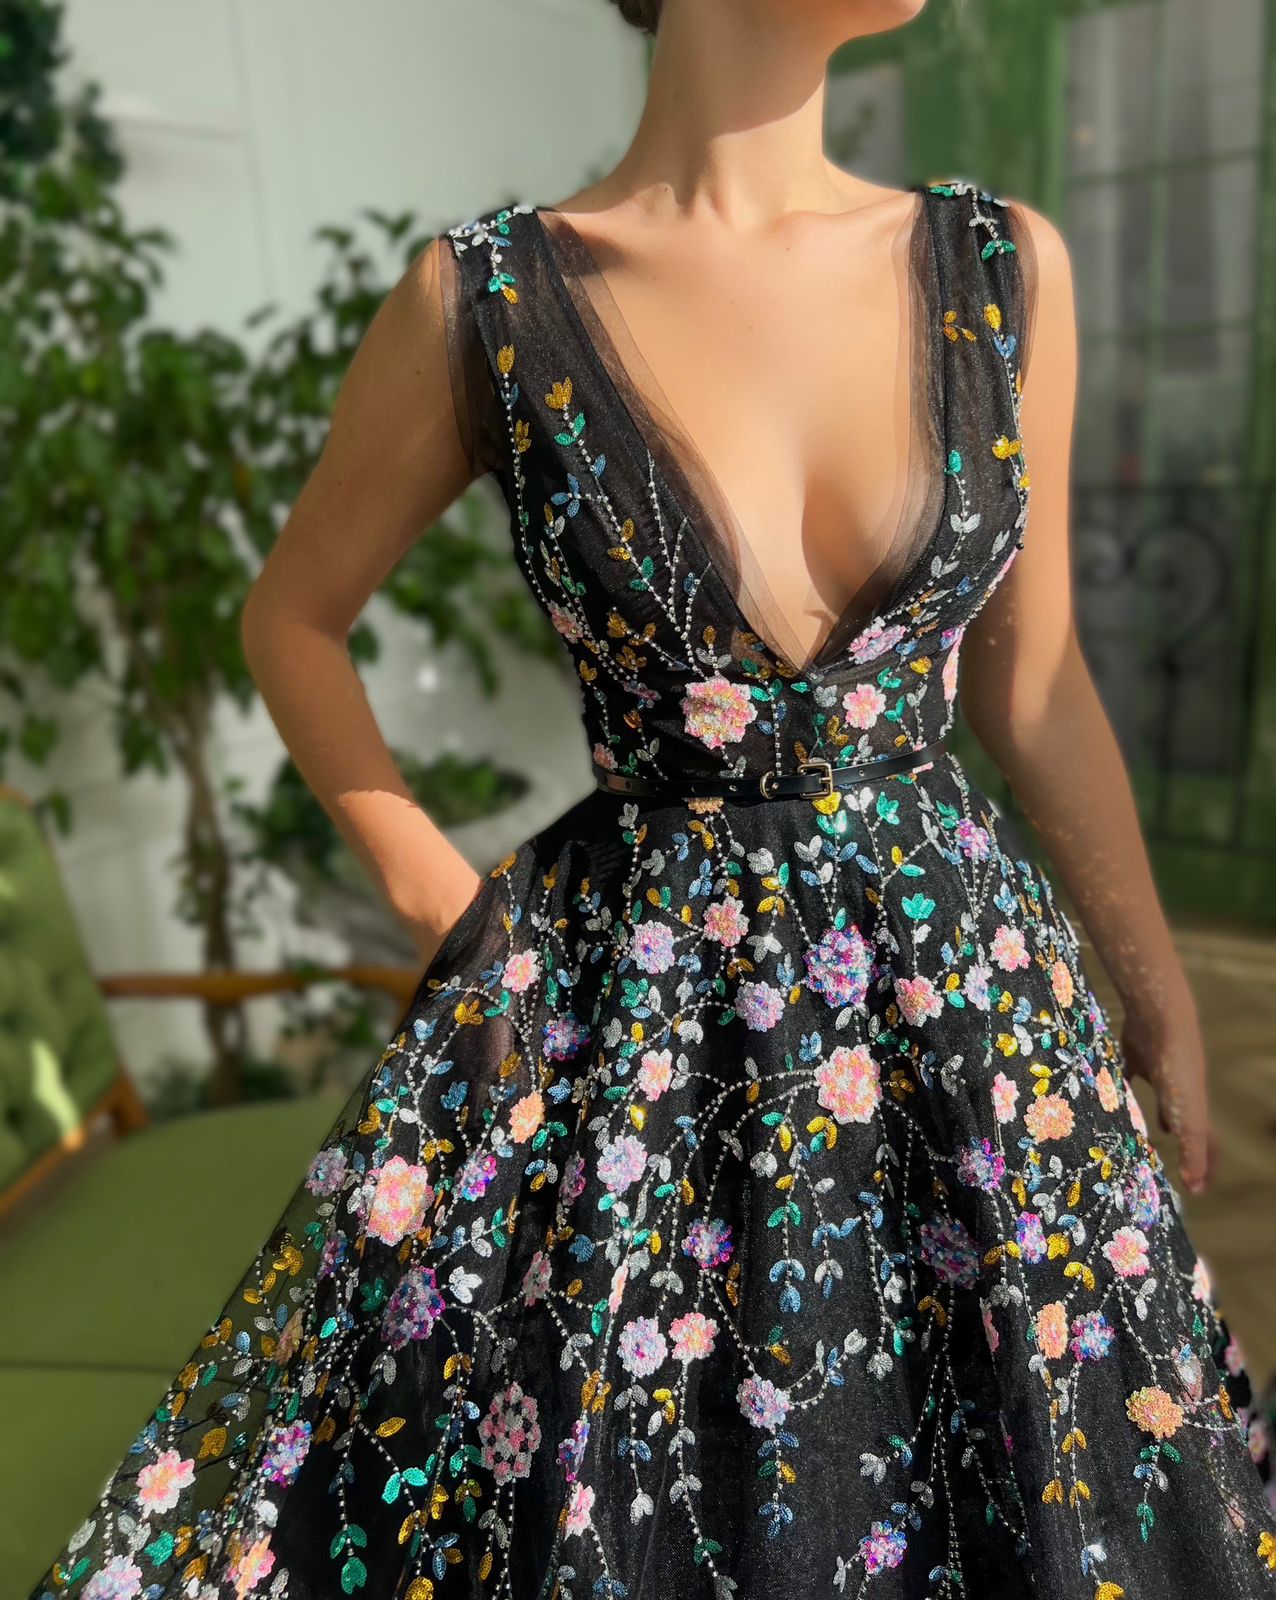 Black A-Line dress with no sleeves, v-neck and flowers